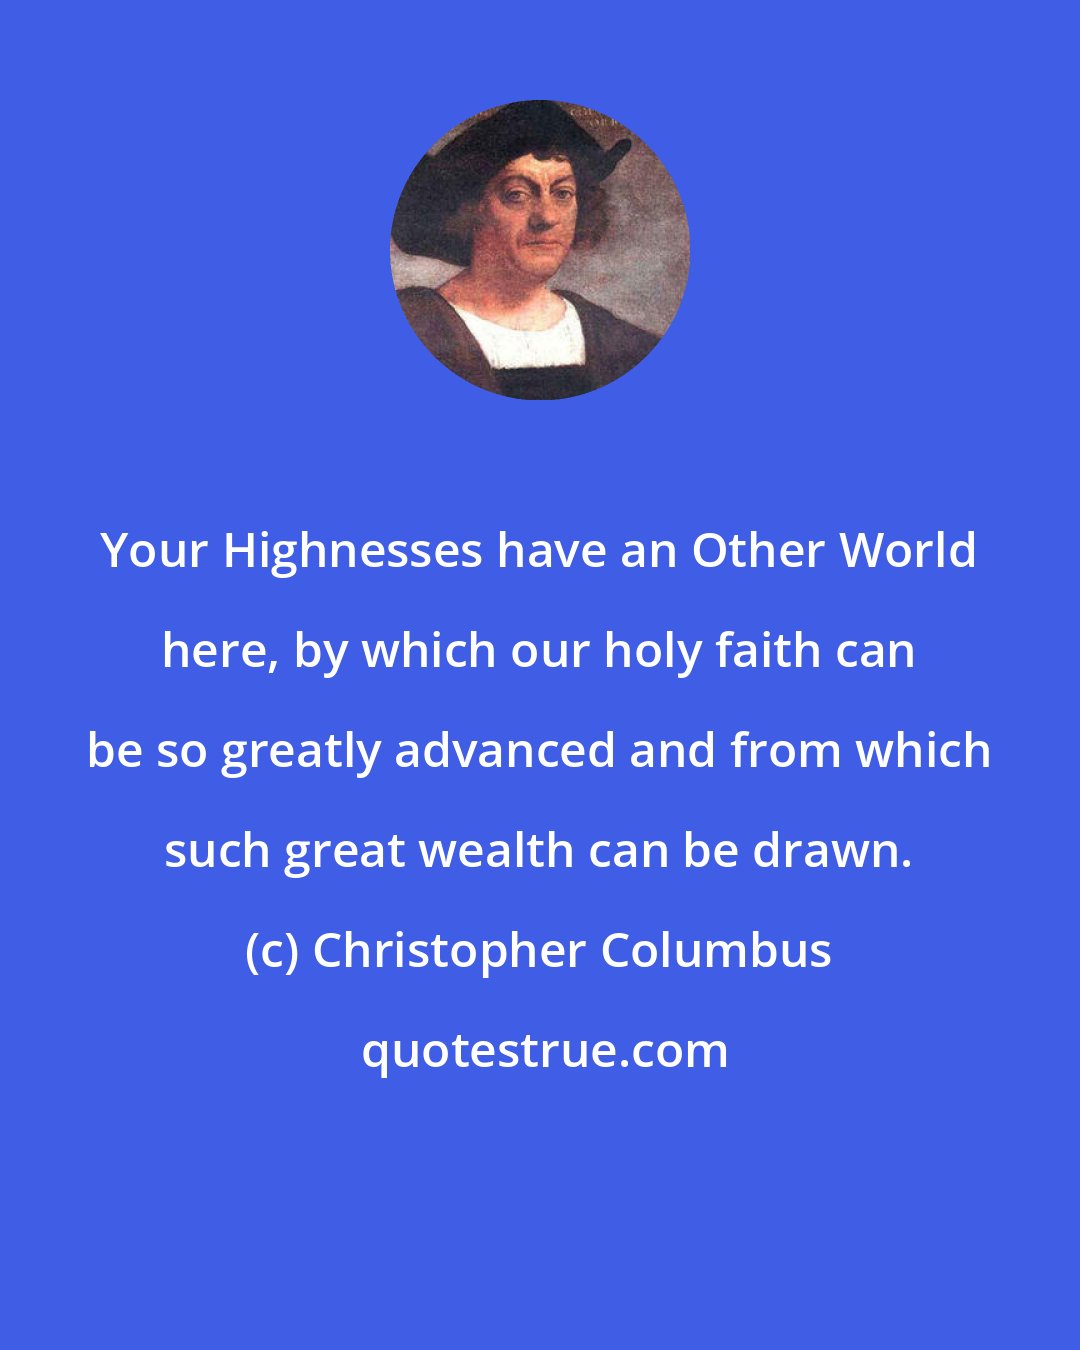 Christopher Columbus: Your Highnesses have an Other World here, by which our holy faith can be so greatly advanced and from which such great wealth can be drawn.